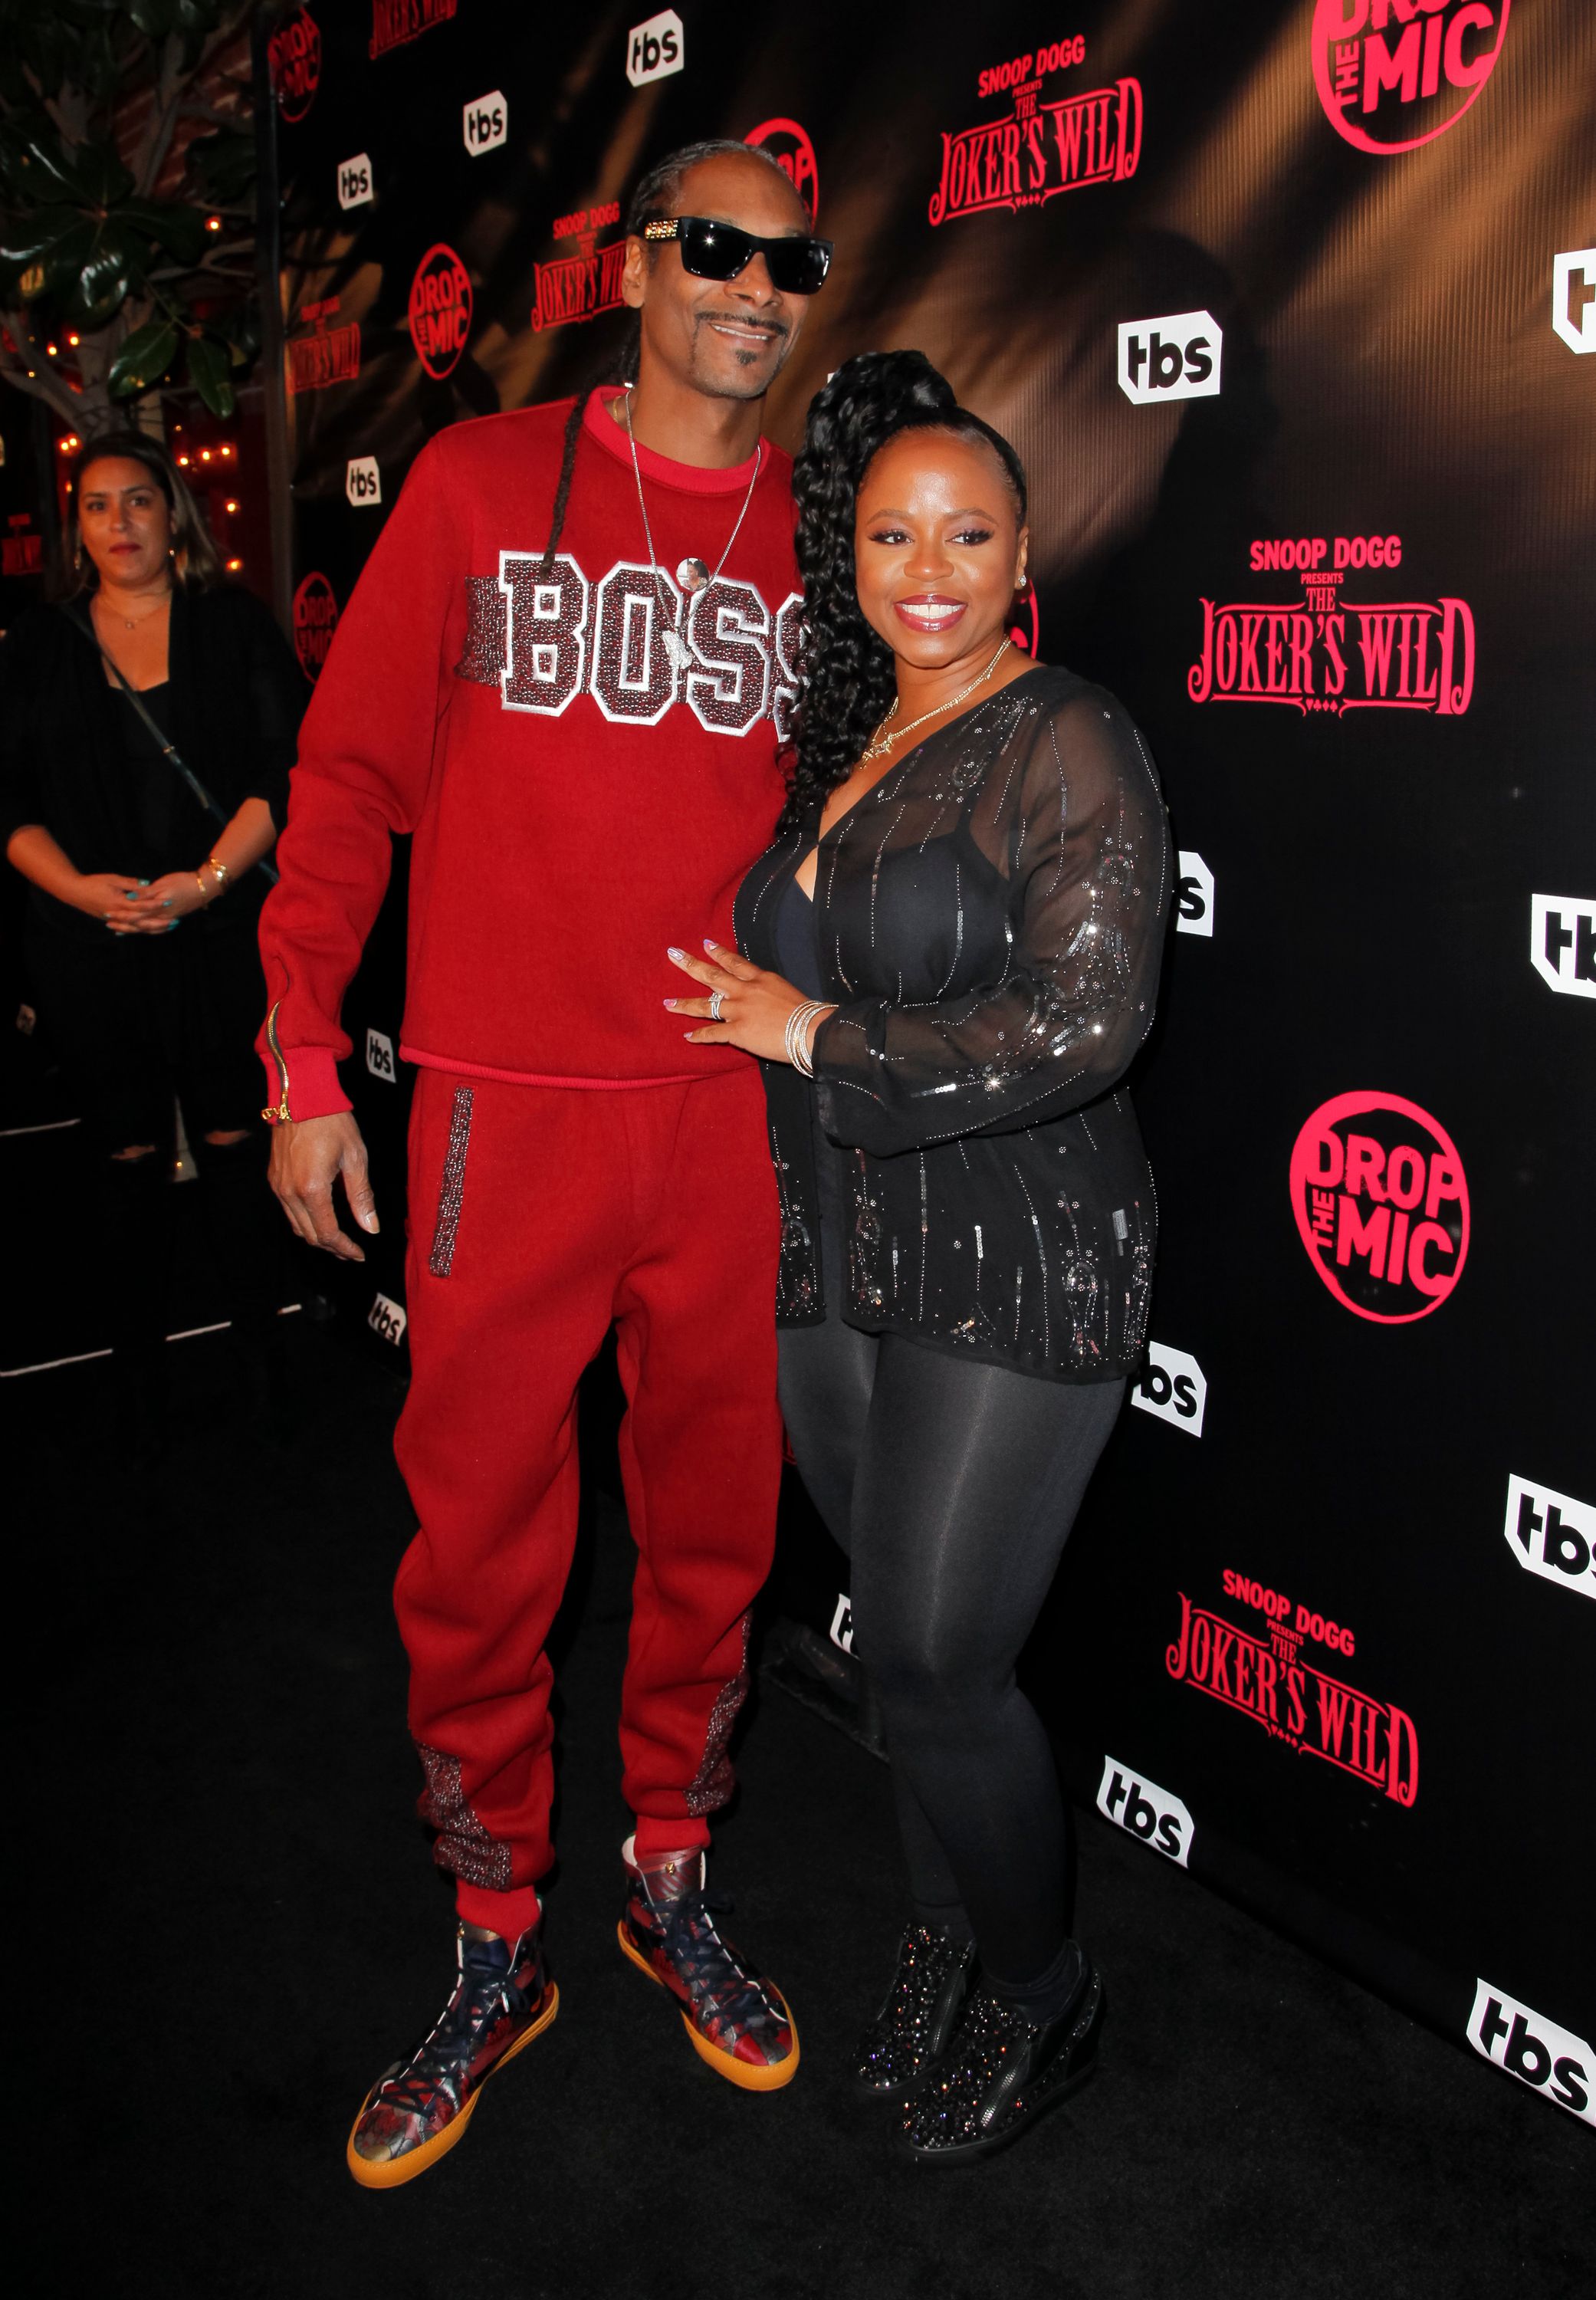 Snoop Dogg and Shante Broadus at the premiere for TBS's "Drop The Mic" and "The Joker's Wild" at The Highlight Room on October 11, 2017. | Photo: Getty Images